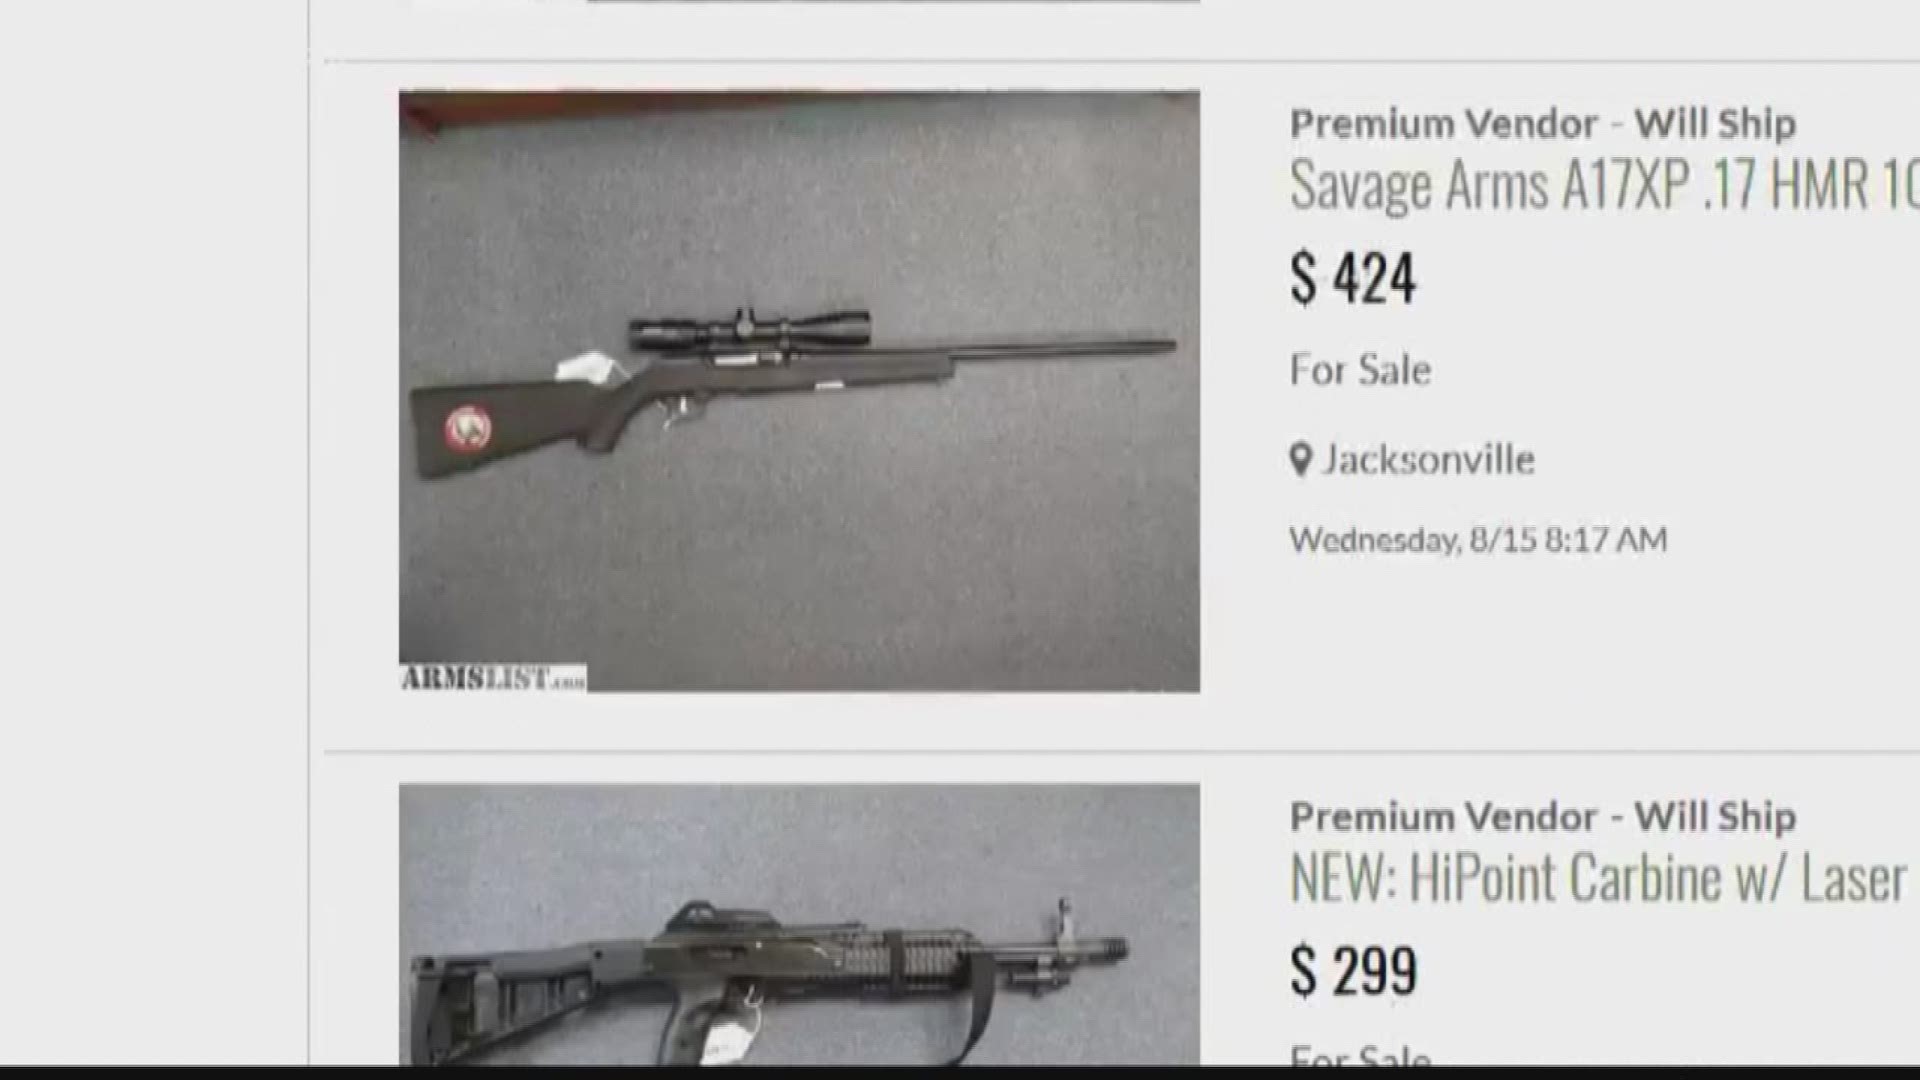 WATCH: Legality and risks of private gun sales in Florida